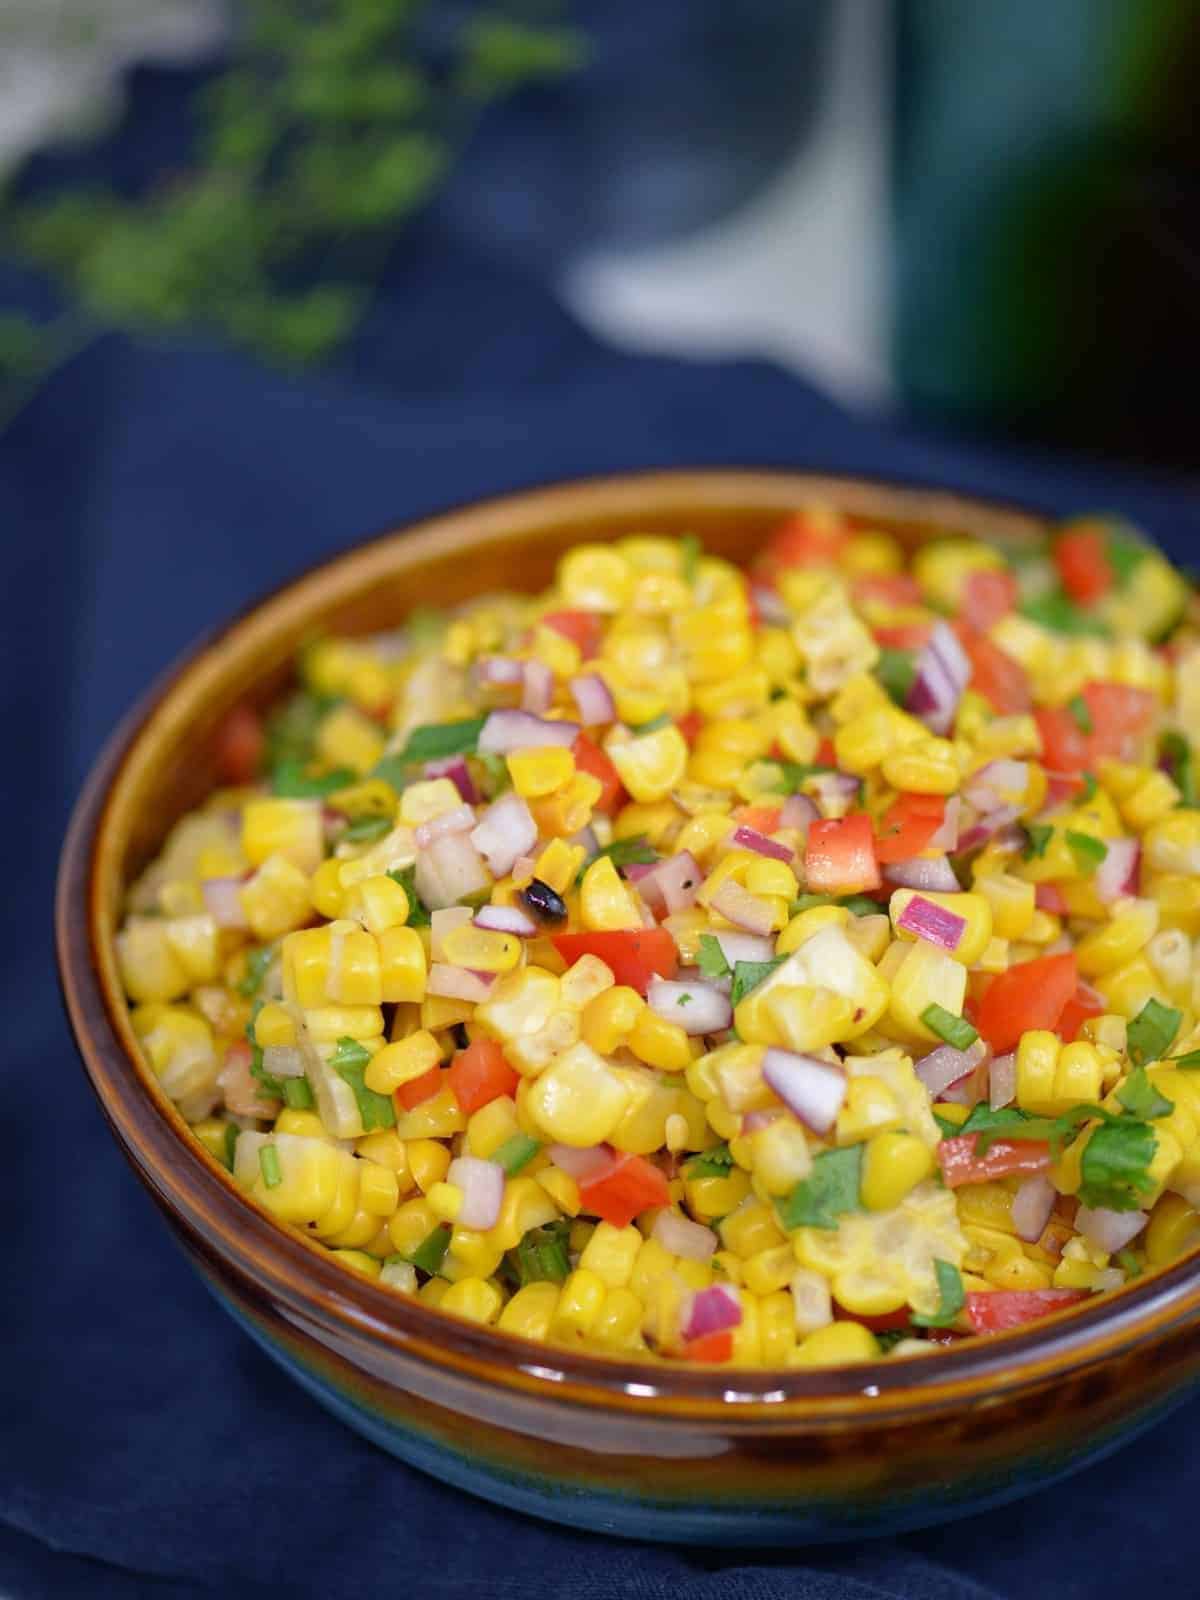 easy corn salsa recipe in a bowl, on top of a blue napkin | foodology geek.